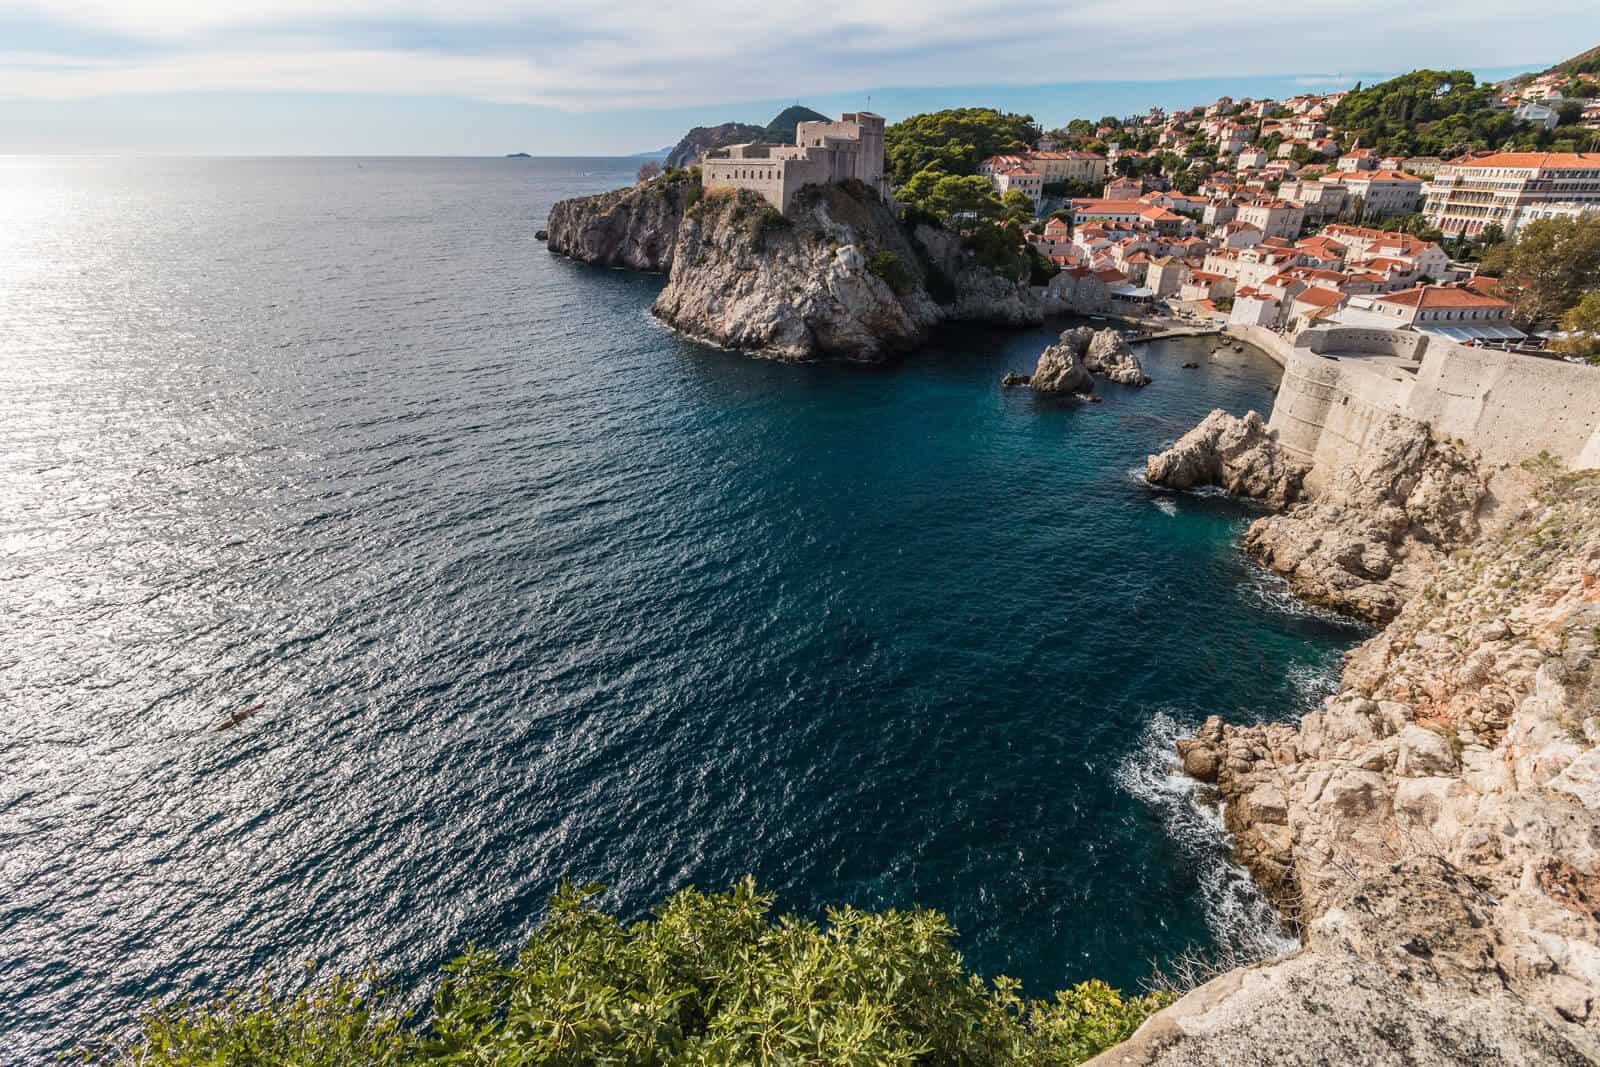 13 Dubrovnik Tours & Day Trips to Make the Most of Your Visit (Croatia)